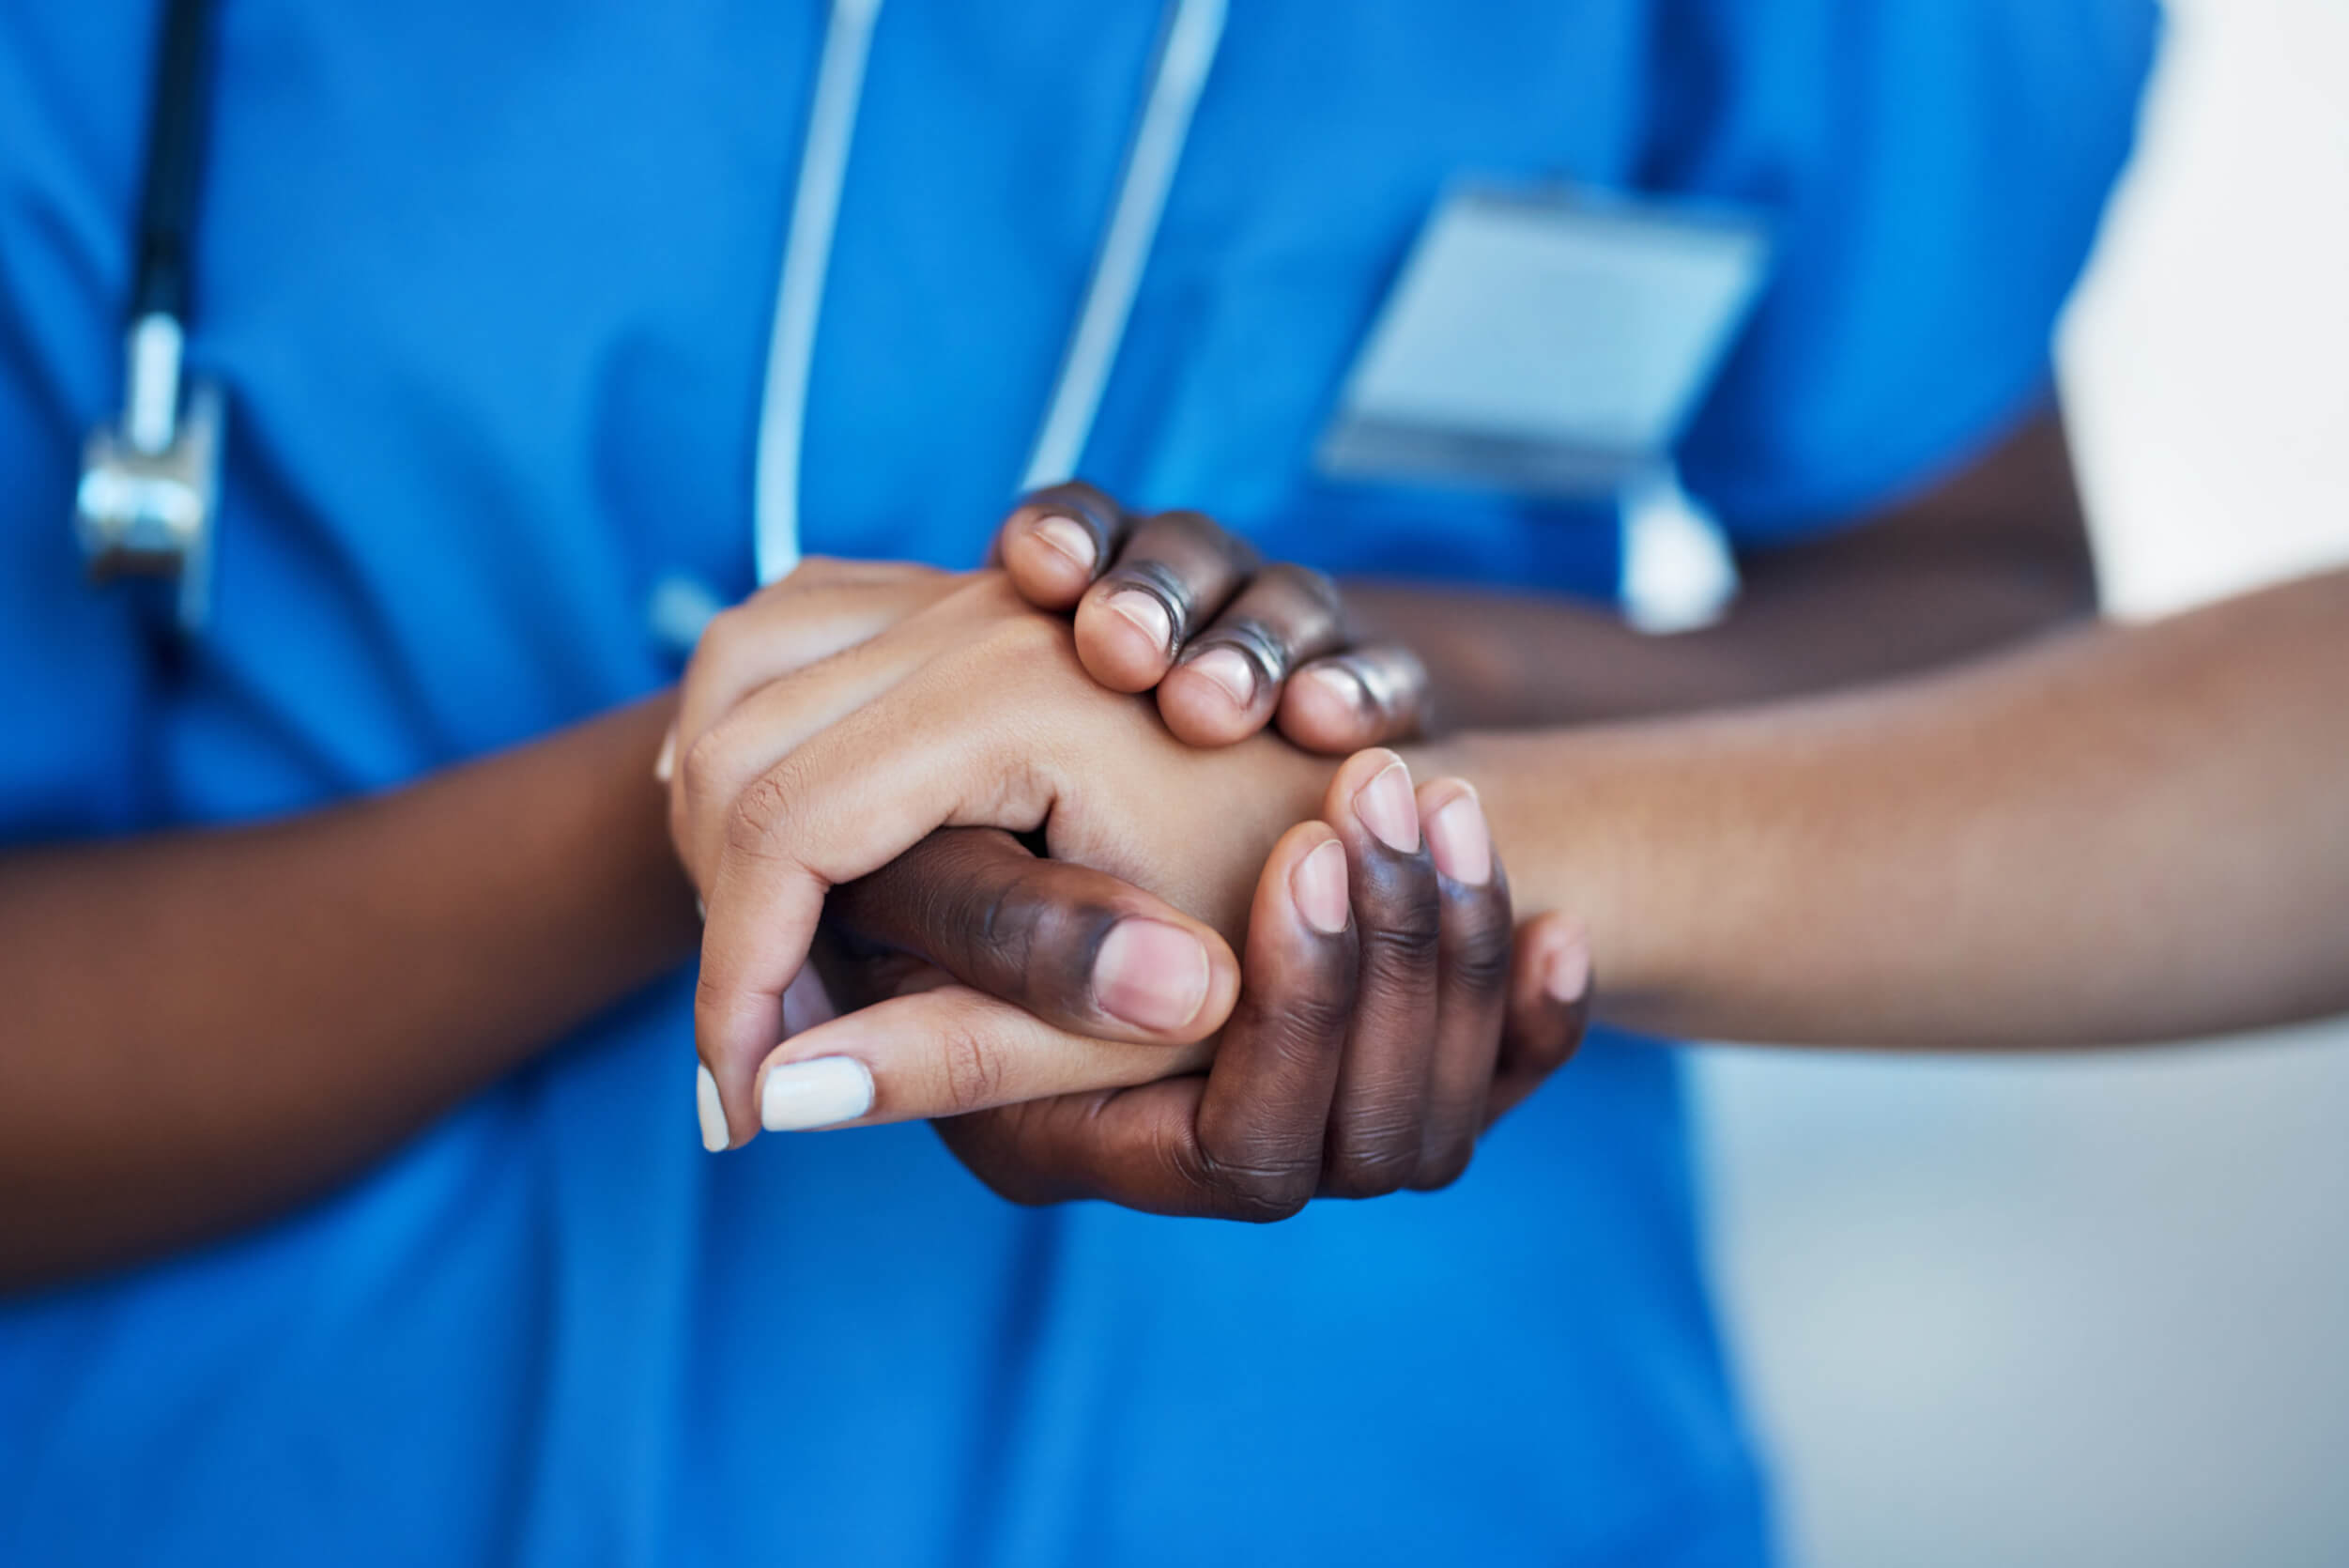 Closeup shot of a nurse holding a patient's hand in comfort